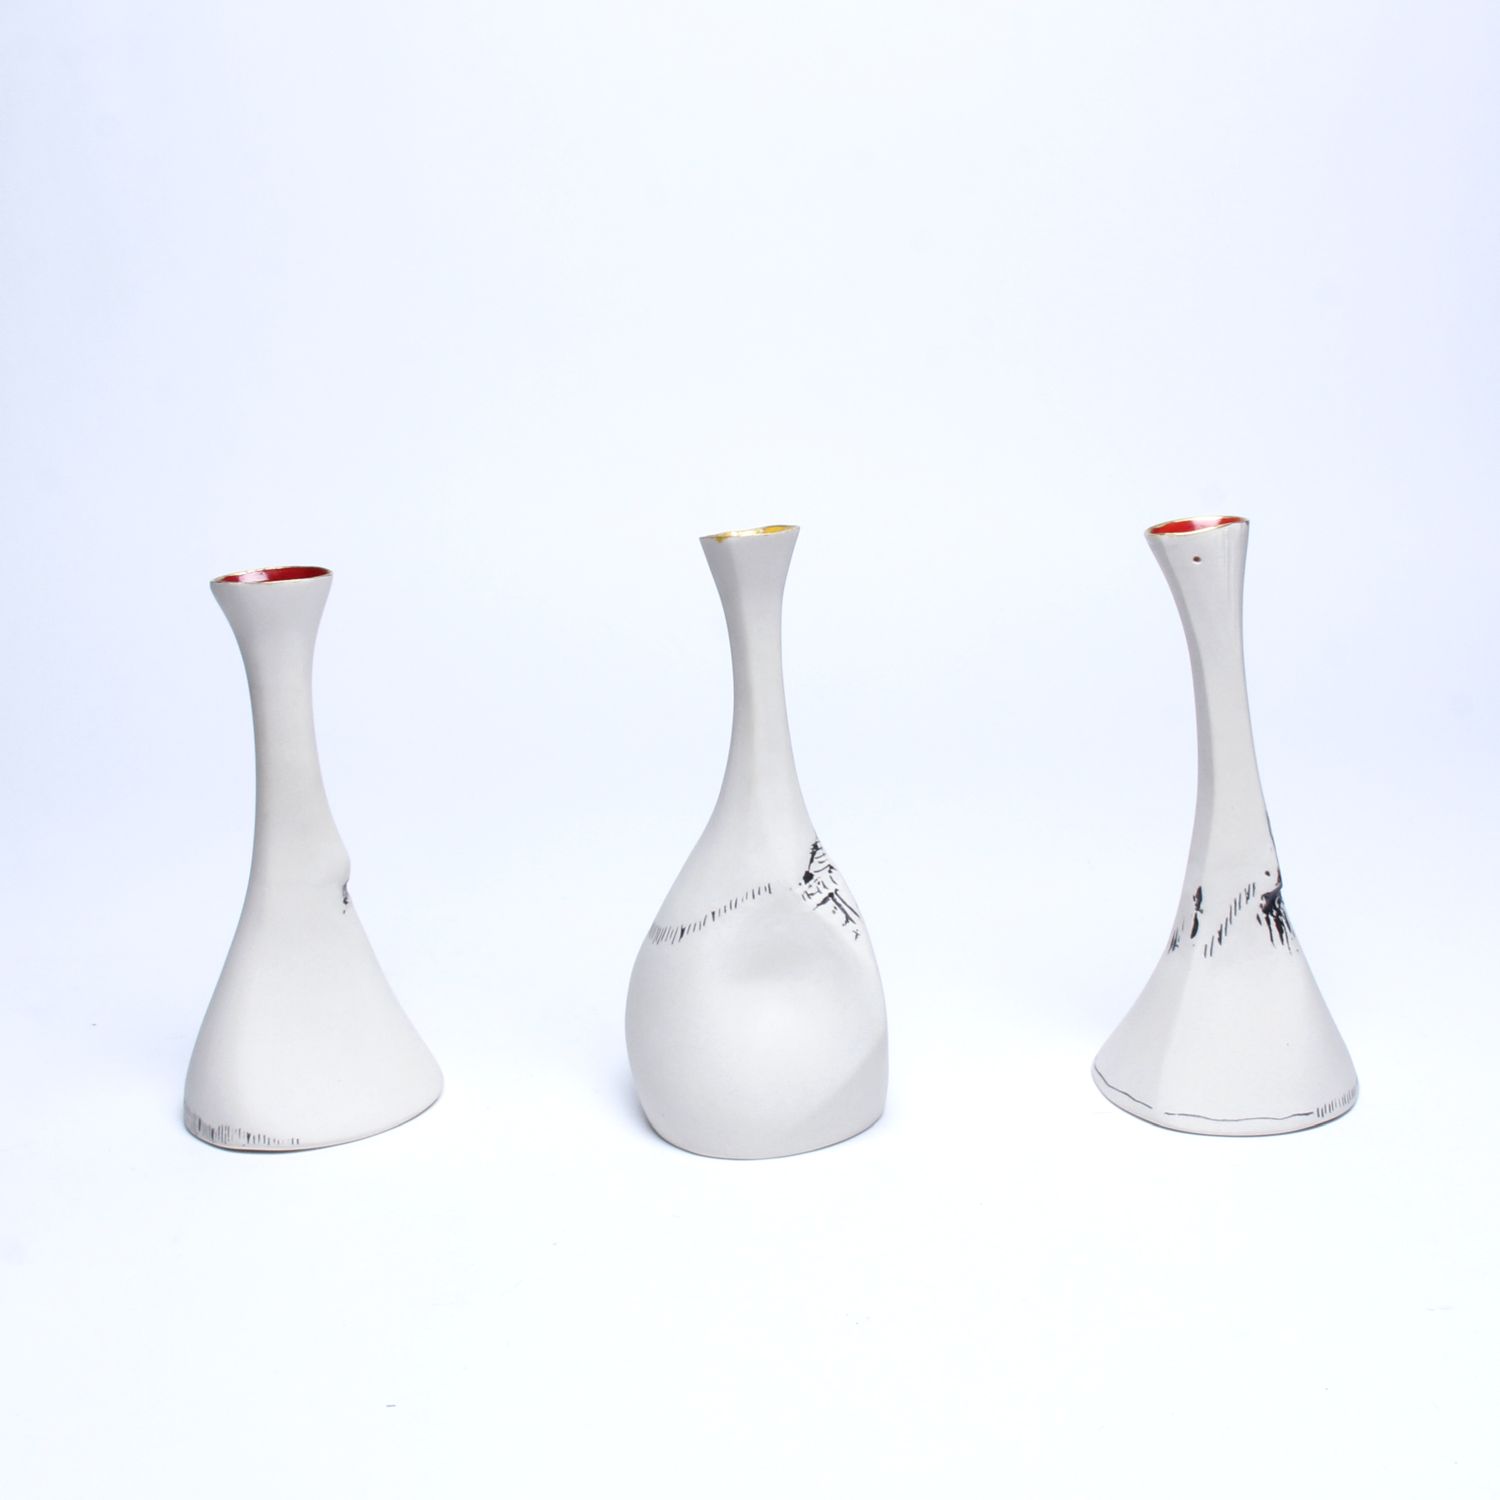 Jane Wilson: Vase (Each sold separately) Product Image 7 of 9